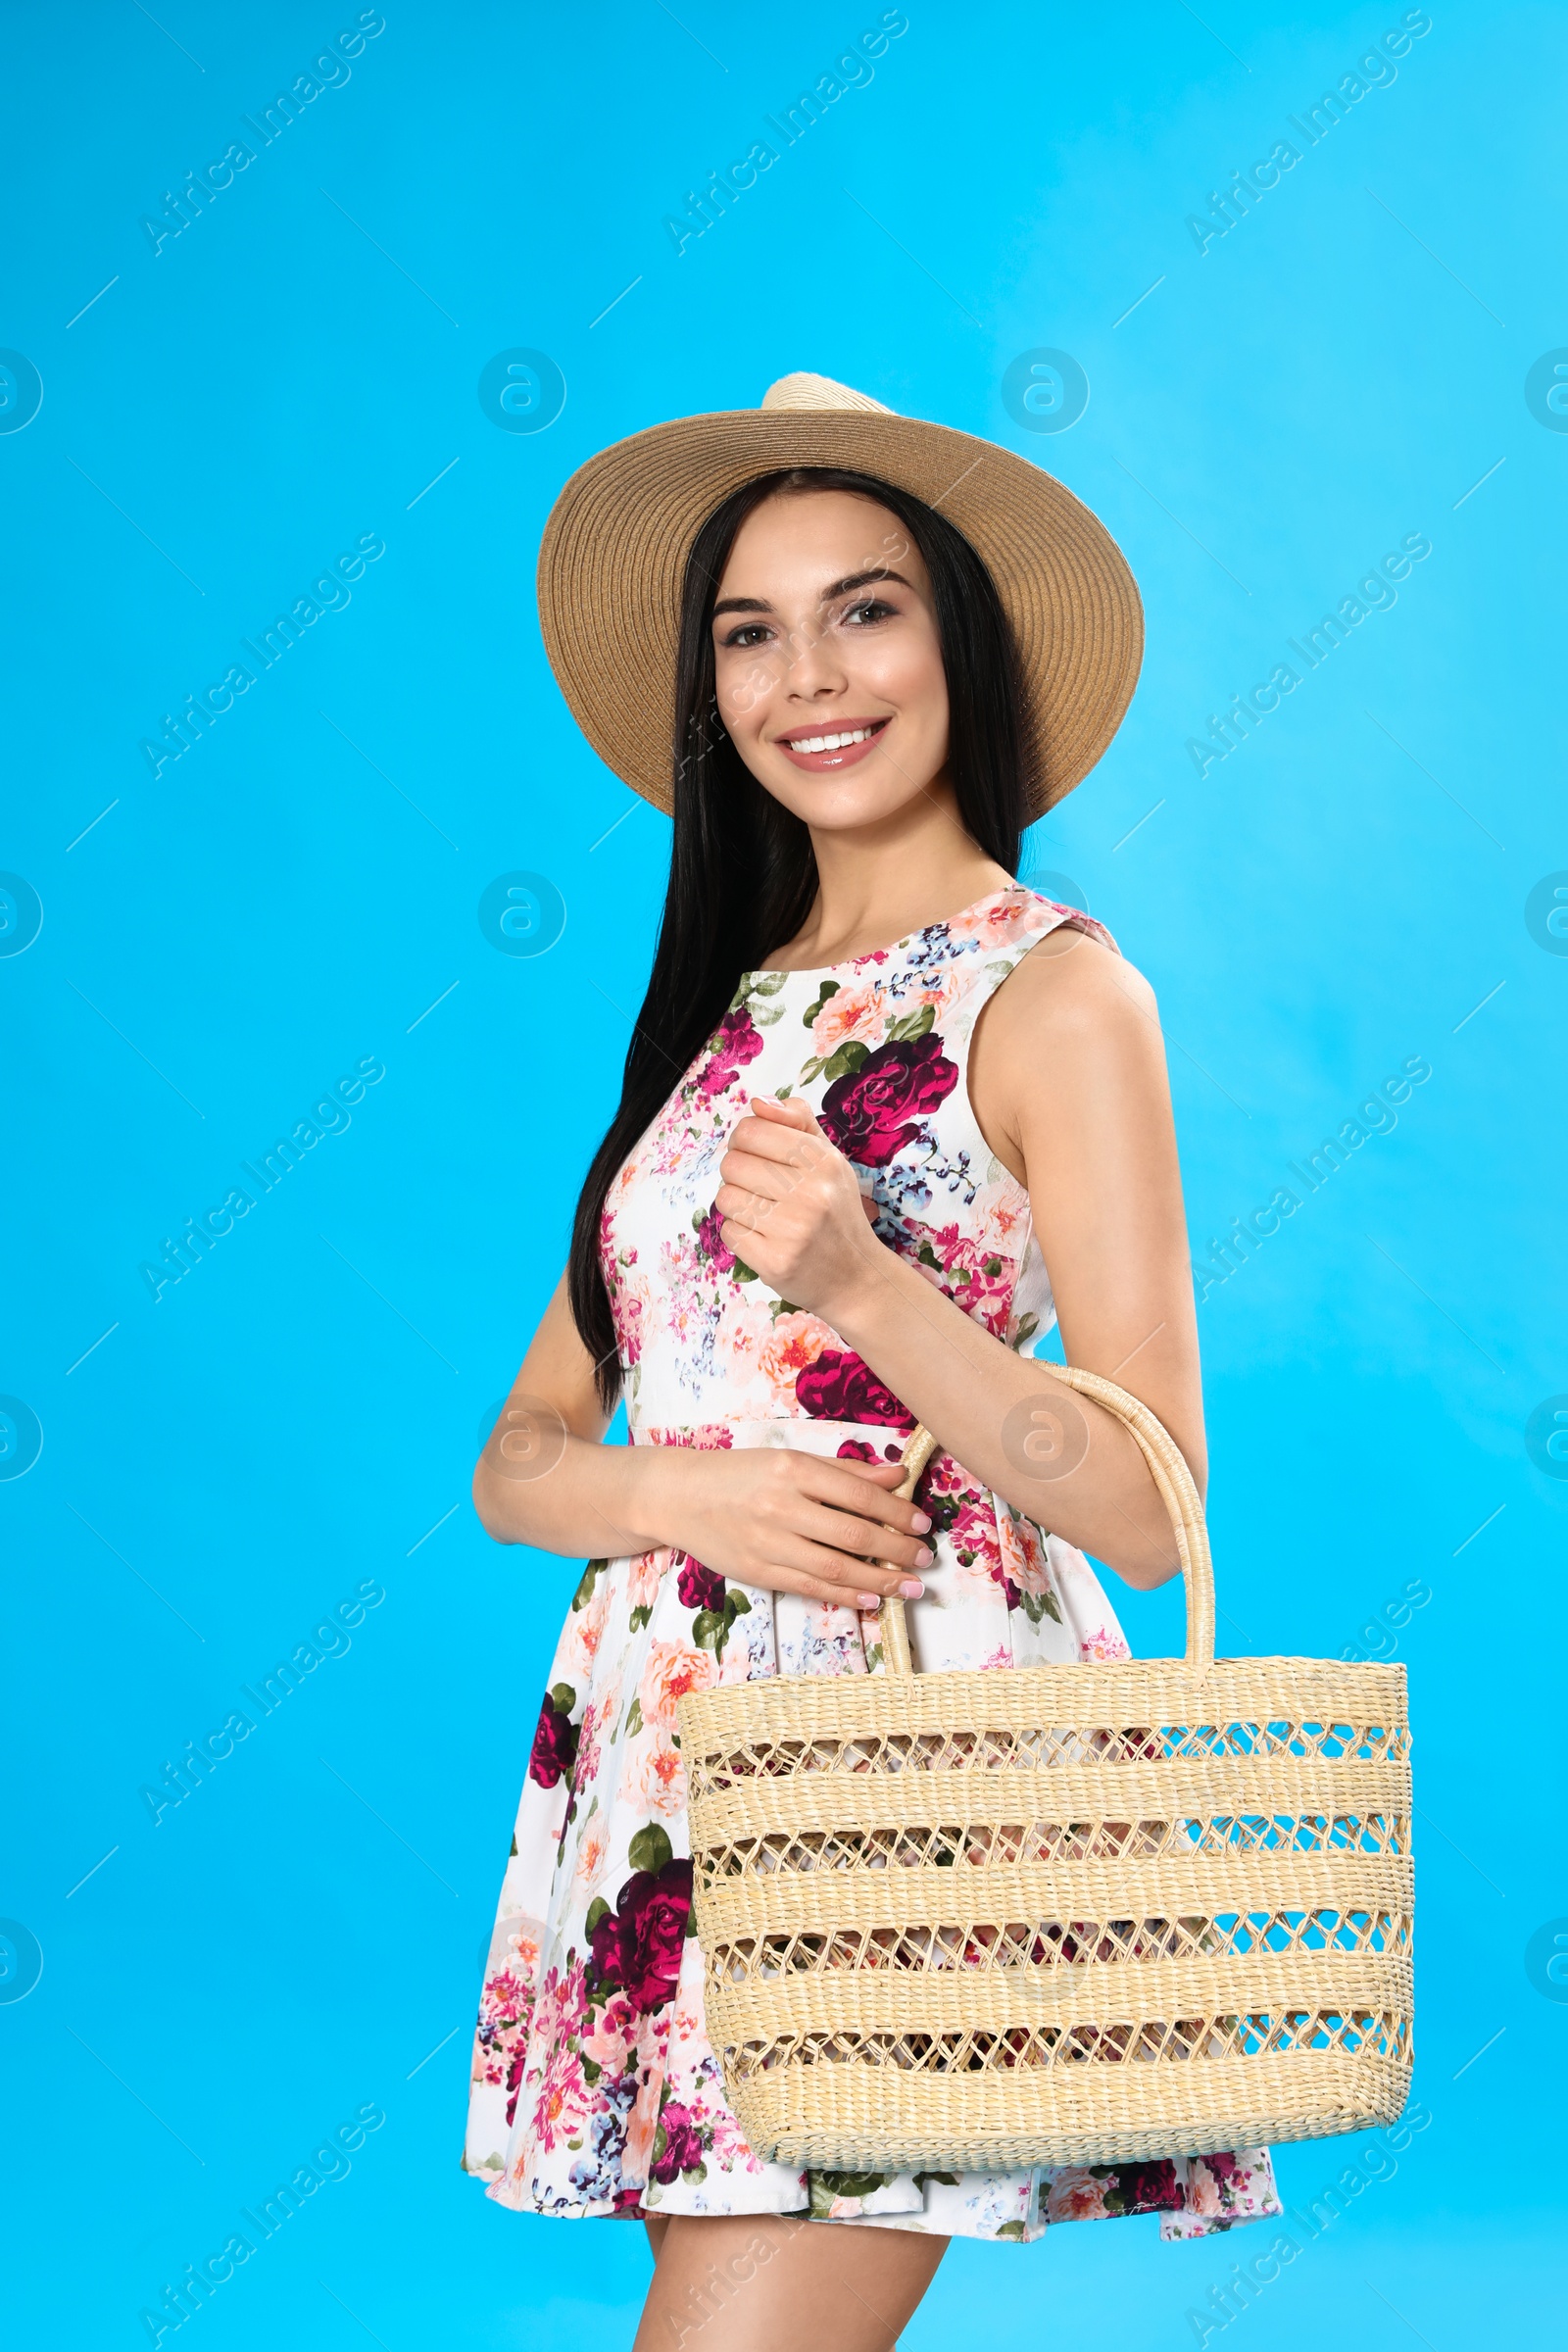 Photo of Young woman wearing floral print dress with straw bag on light blue background